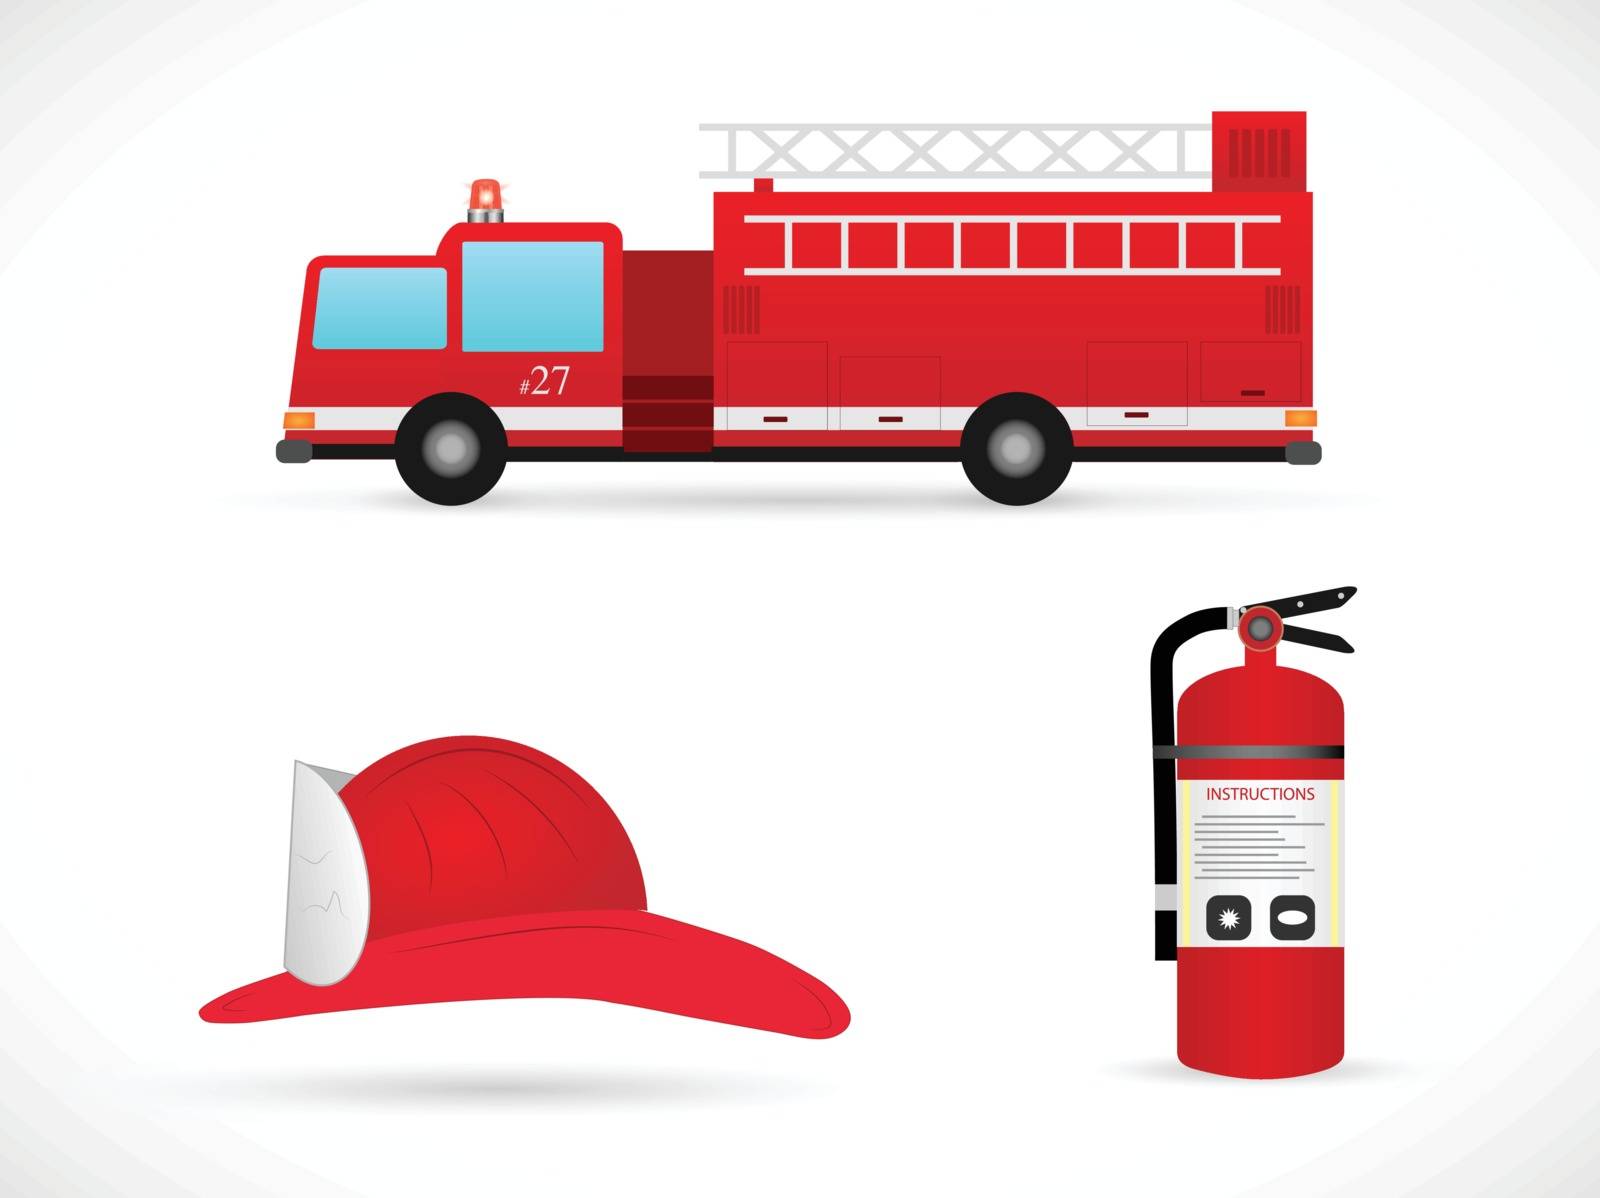 Firefighter Items Illustration by nmarques74